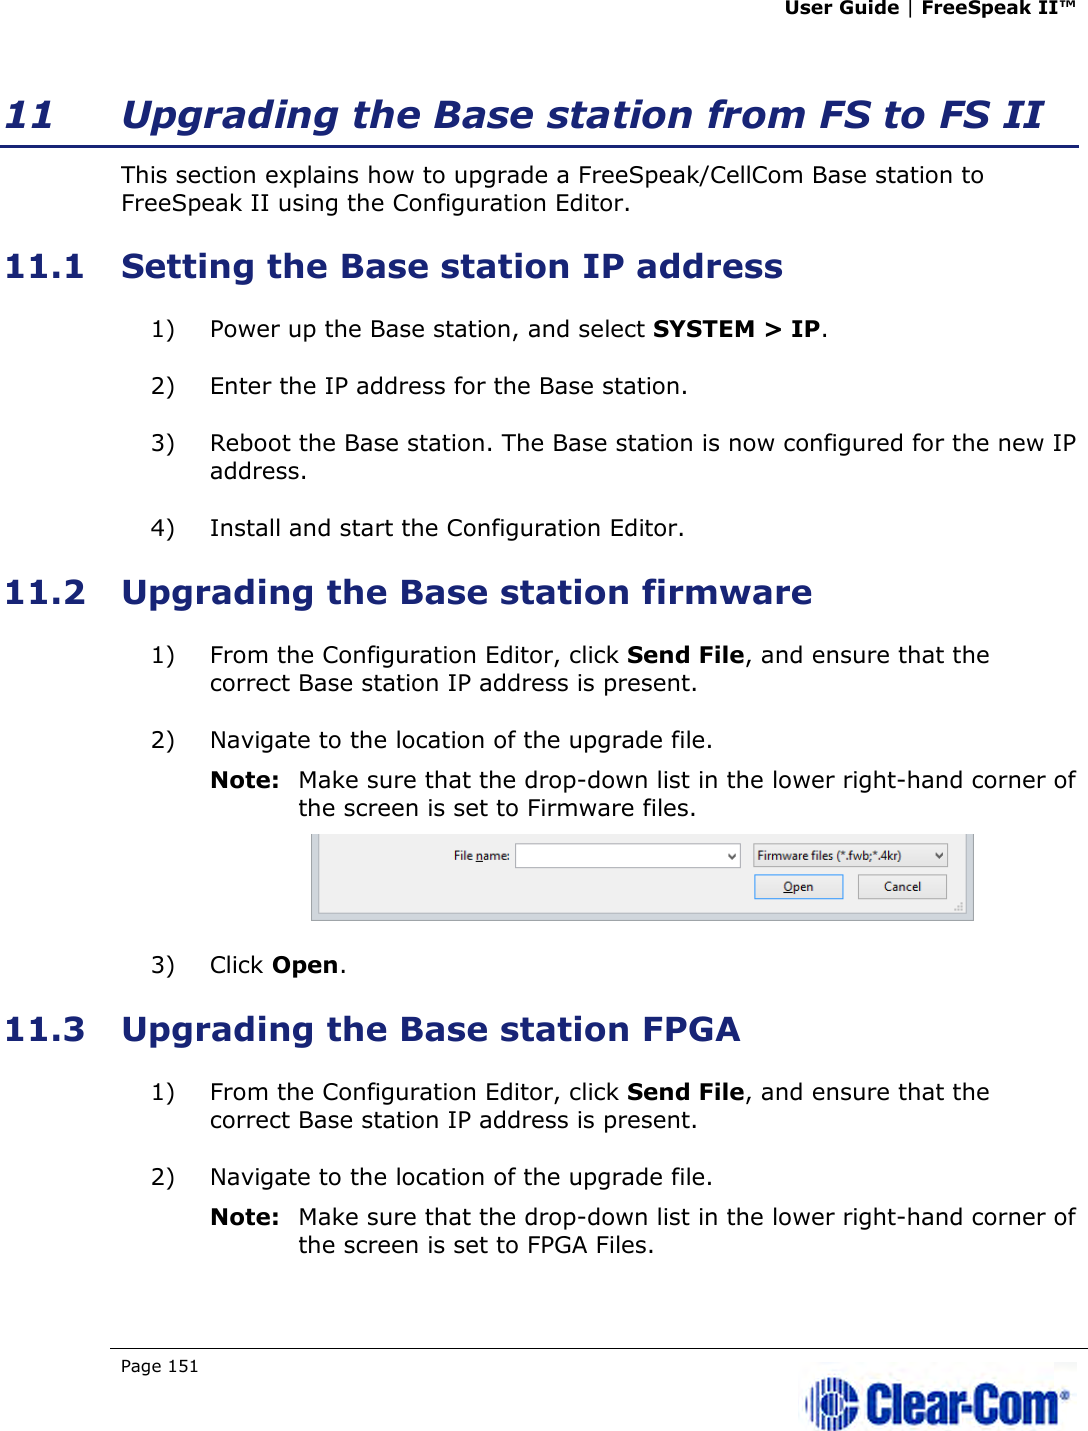 User Guide | FreeSpeak II™  Page 151   11 Upgrading the Base station from FS to FS II This section explains how to upgrade a FreeSpeak/CellCom Base station to FreeSpeak II using the Configuration Editor. 11.1 Setting the Base station IP address 1) Power up the Base station, and select SYSTEM &gt; IP. 2) Enter the IP address for the Base station. 3) Reboot the Base station. The Base station is now configured for the new IP address. 4) Install and start the Configuration Editor. 11.2 Upgrading the Base station firmware 1) From the Configuration Editor, click Send File, and ensure that the correct Base station IP address is present. 2) Navigate to the location of the upgrade file. Note: Make sure that the drop-down list in the lower right-hand corner of the screen is set to Firmware files.  3) Click Open. 11.3 Upgrading the Base station FPGA 1) From the Configuration Editor, click Send File, and ensure that the correct Base station IP address is present. 2) Navigate to the location of the upgrade file. Note: Make sure that the drop-down list in the lower right-hand corner of the screen is set to FPGA Files. 